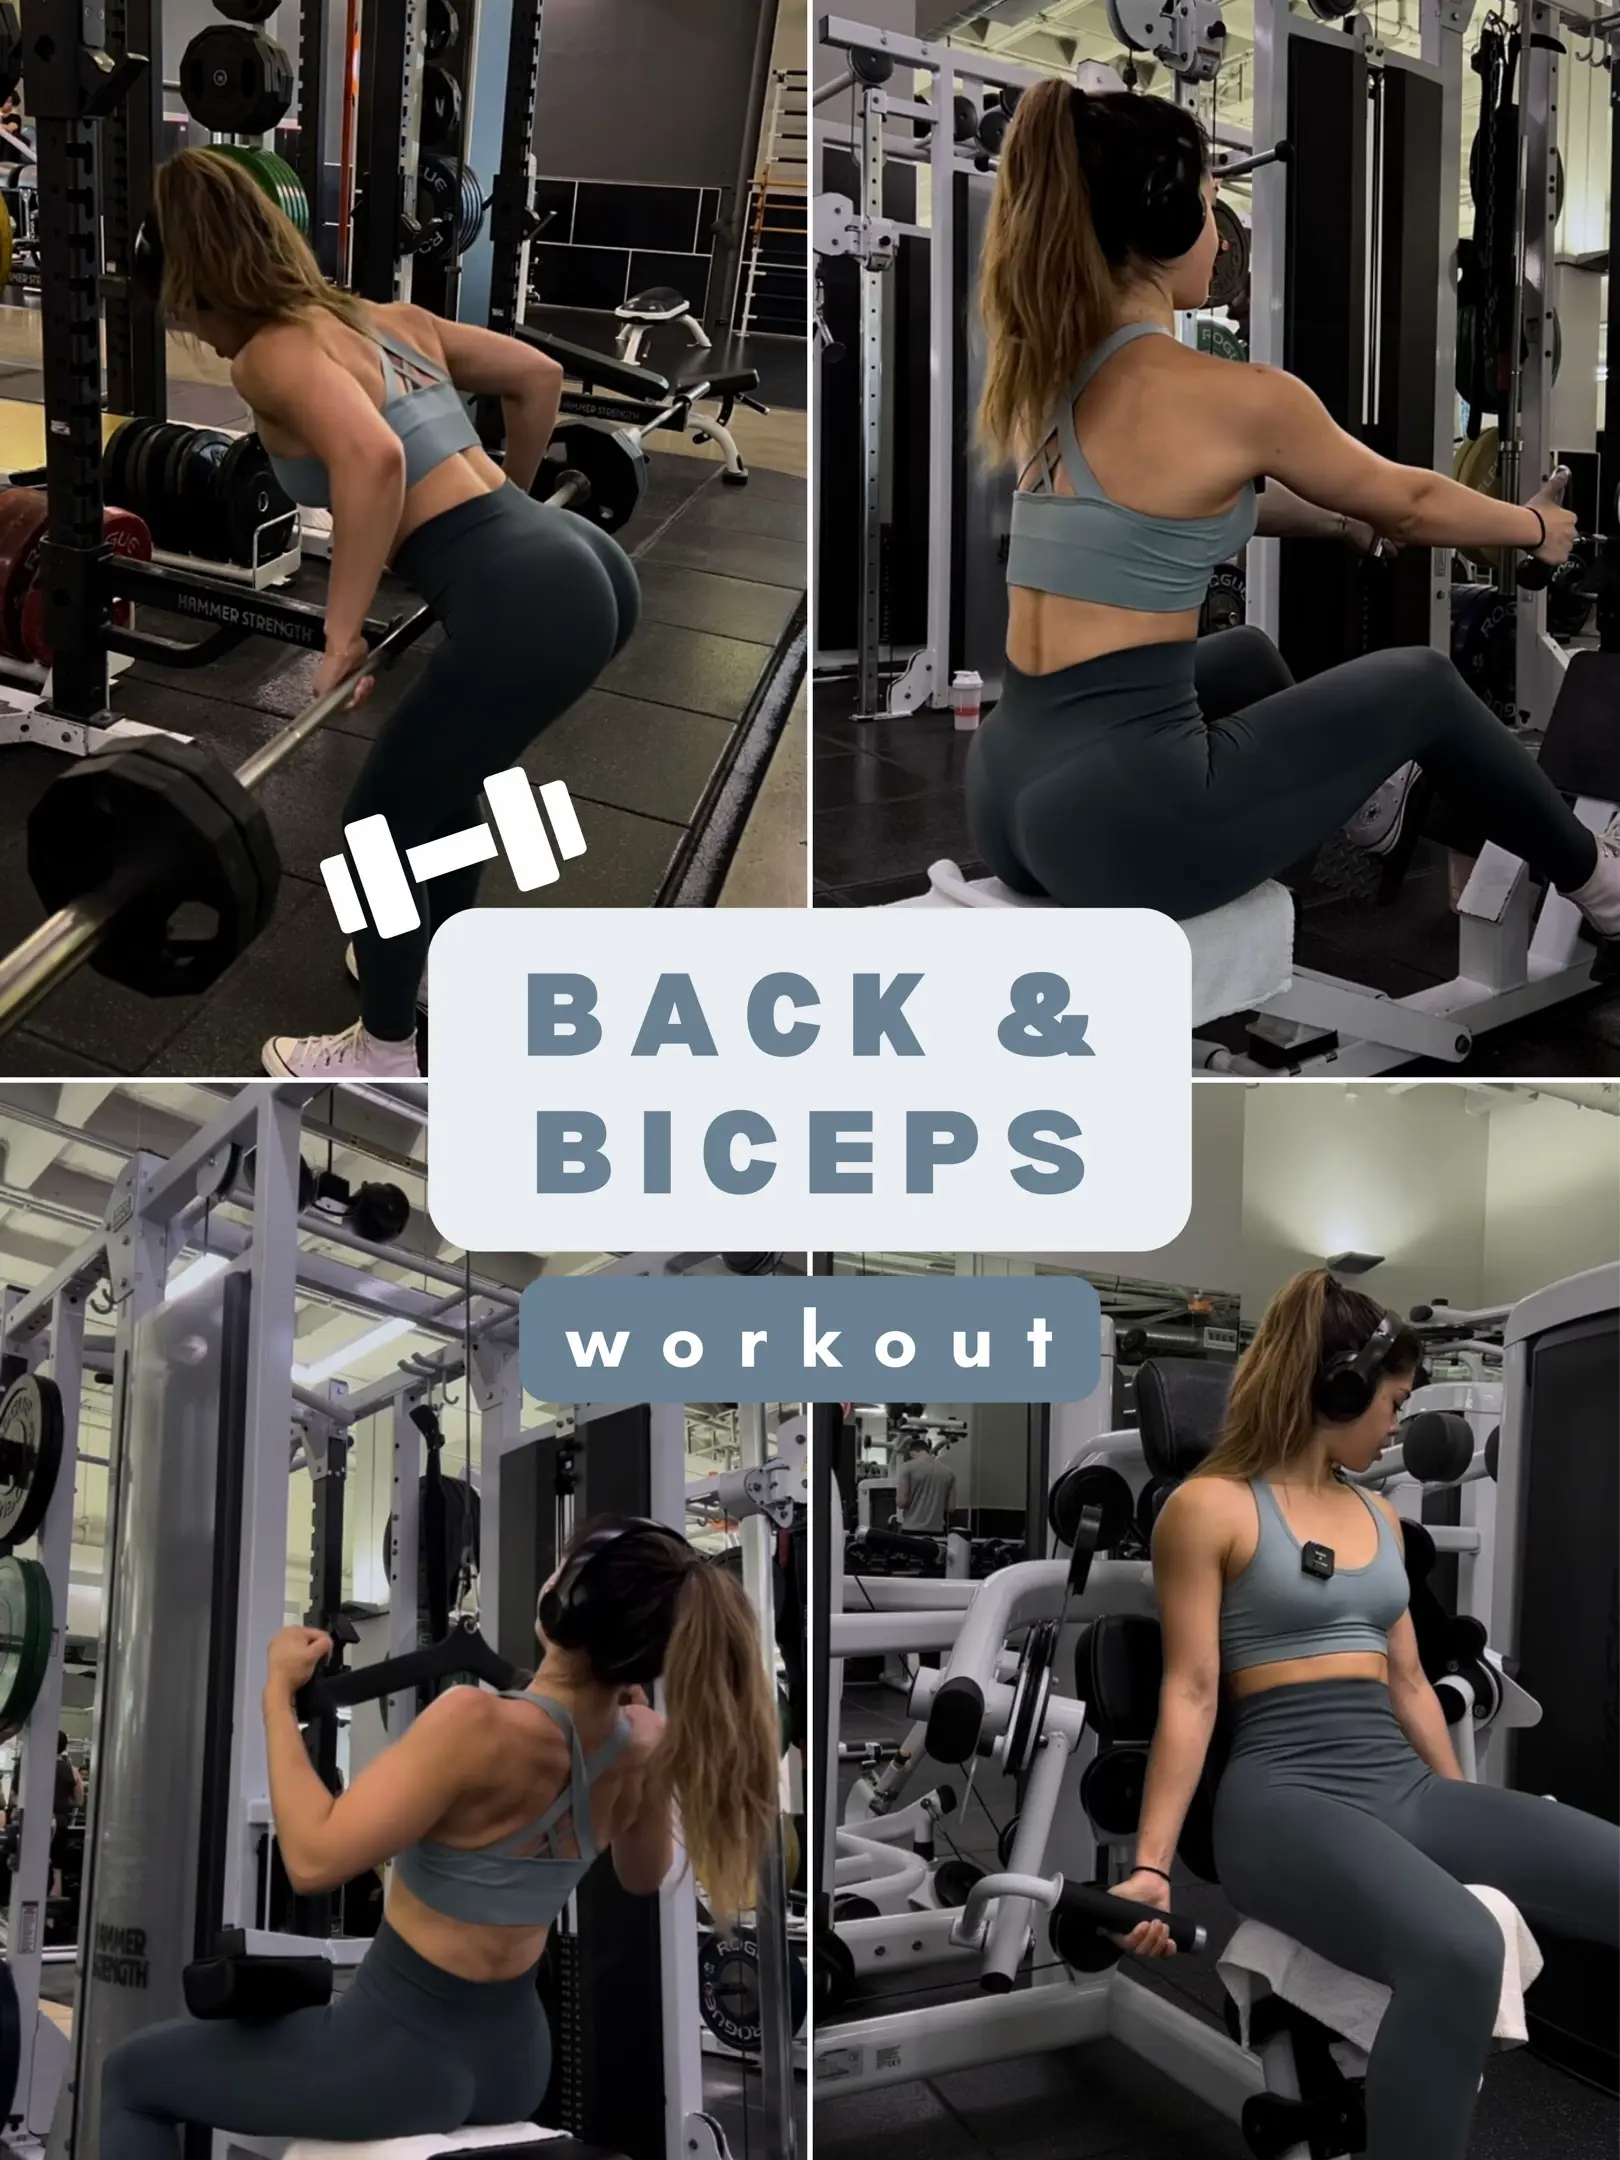 Beginner Gym Tips: Realistic Workouts For Back, Biceps